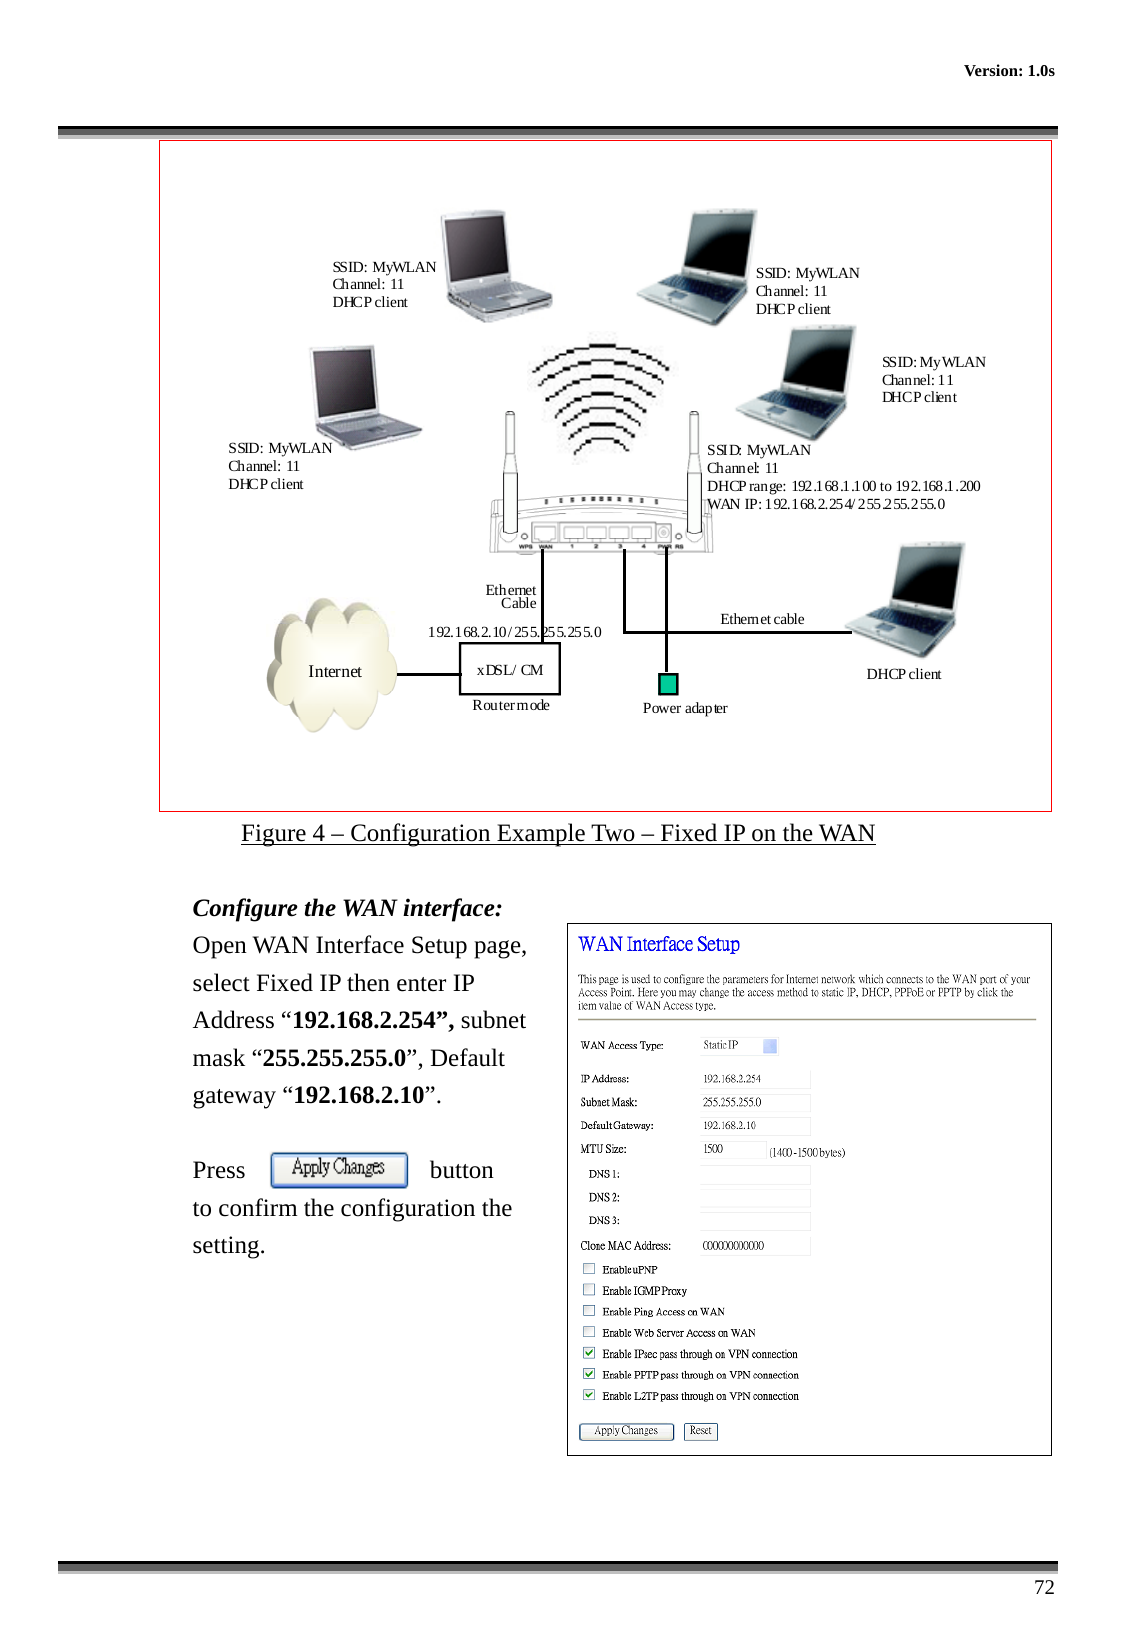    Version: 1.0s      72 Internet xDSL/ CMPower adapterEthernetCable Ethernet cableSS ID :  M y WLA NChannel: 11 DHC P cl ien tSSID: MyWLANChannel: 11 DHCP clientSSID: MyWLANChannel: 11 DHCP clientSSID: MyWLANChannel: 11 DHCP clientDHCP clientR ou ter m odeSSID: MyWLANCh ann el: 11DHCP range: 192.168.1.100 to 192.168.1.200WAN IP: 192.168.2.254/ 2 55.255.255.01 92.1 68.2. 10 / 25 5. 25 5.25 5. 0 Figure 4 – Configuration Example Two – Fixed IP on the WAN  Configure the WAN interface: Open WAN Interface Setup page, select Fixed IP then enter IP Address “192.168.2.254”, subnet mask “255.255.255.0”, Default gateway “192.168.2.10”.  Press  button   to confirm the configuration the setting.        